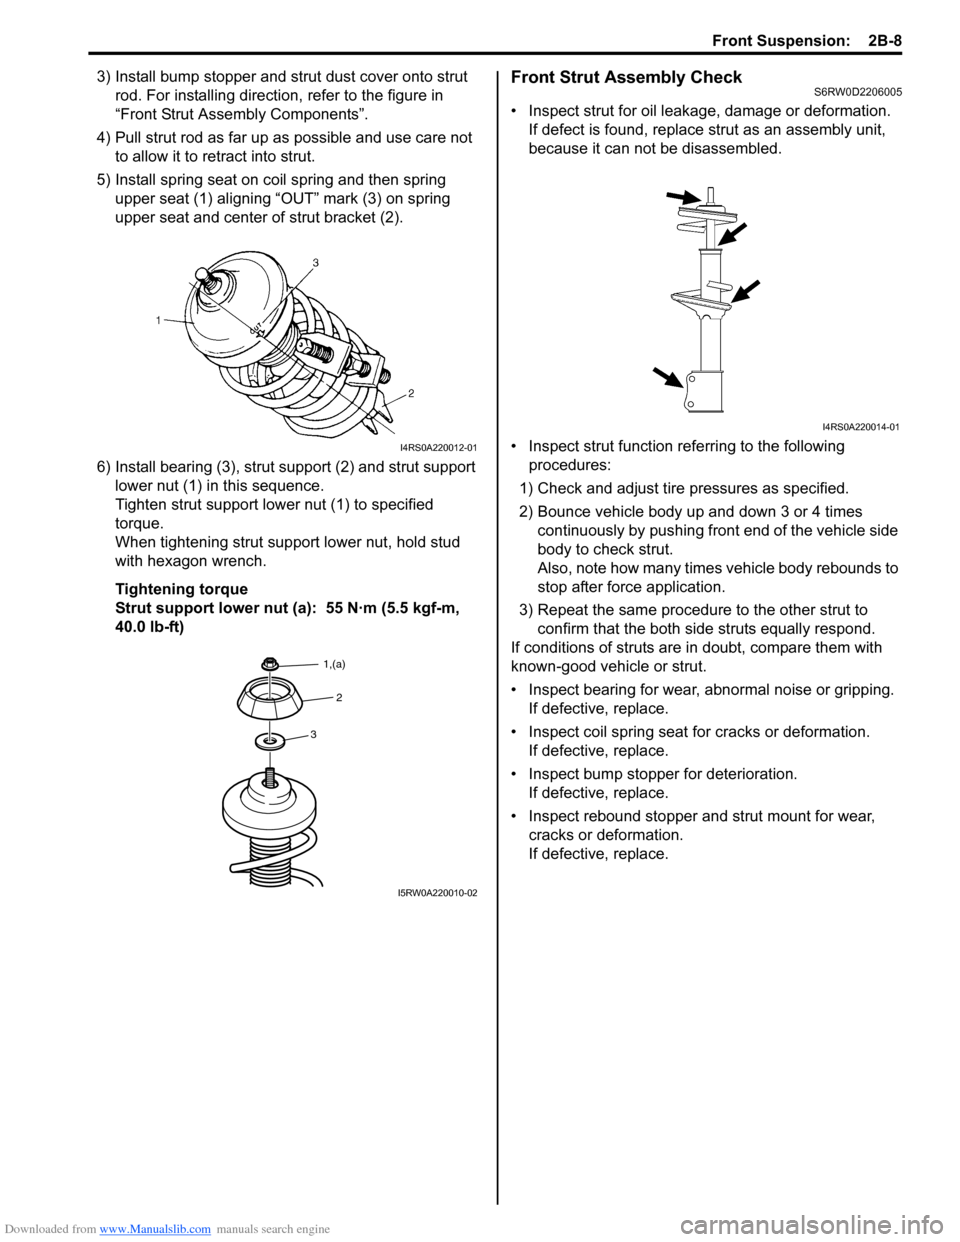 SUZUKI SX4 2006 1.G Service Workshop Manual Downloaded from www.Manualslib.com manuals search engine Front Suspension:  2B-8
3) Install bump stopper and strut dust cover onto strut 
rod. For installing direction, refer to the figure in 
“Fron